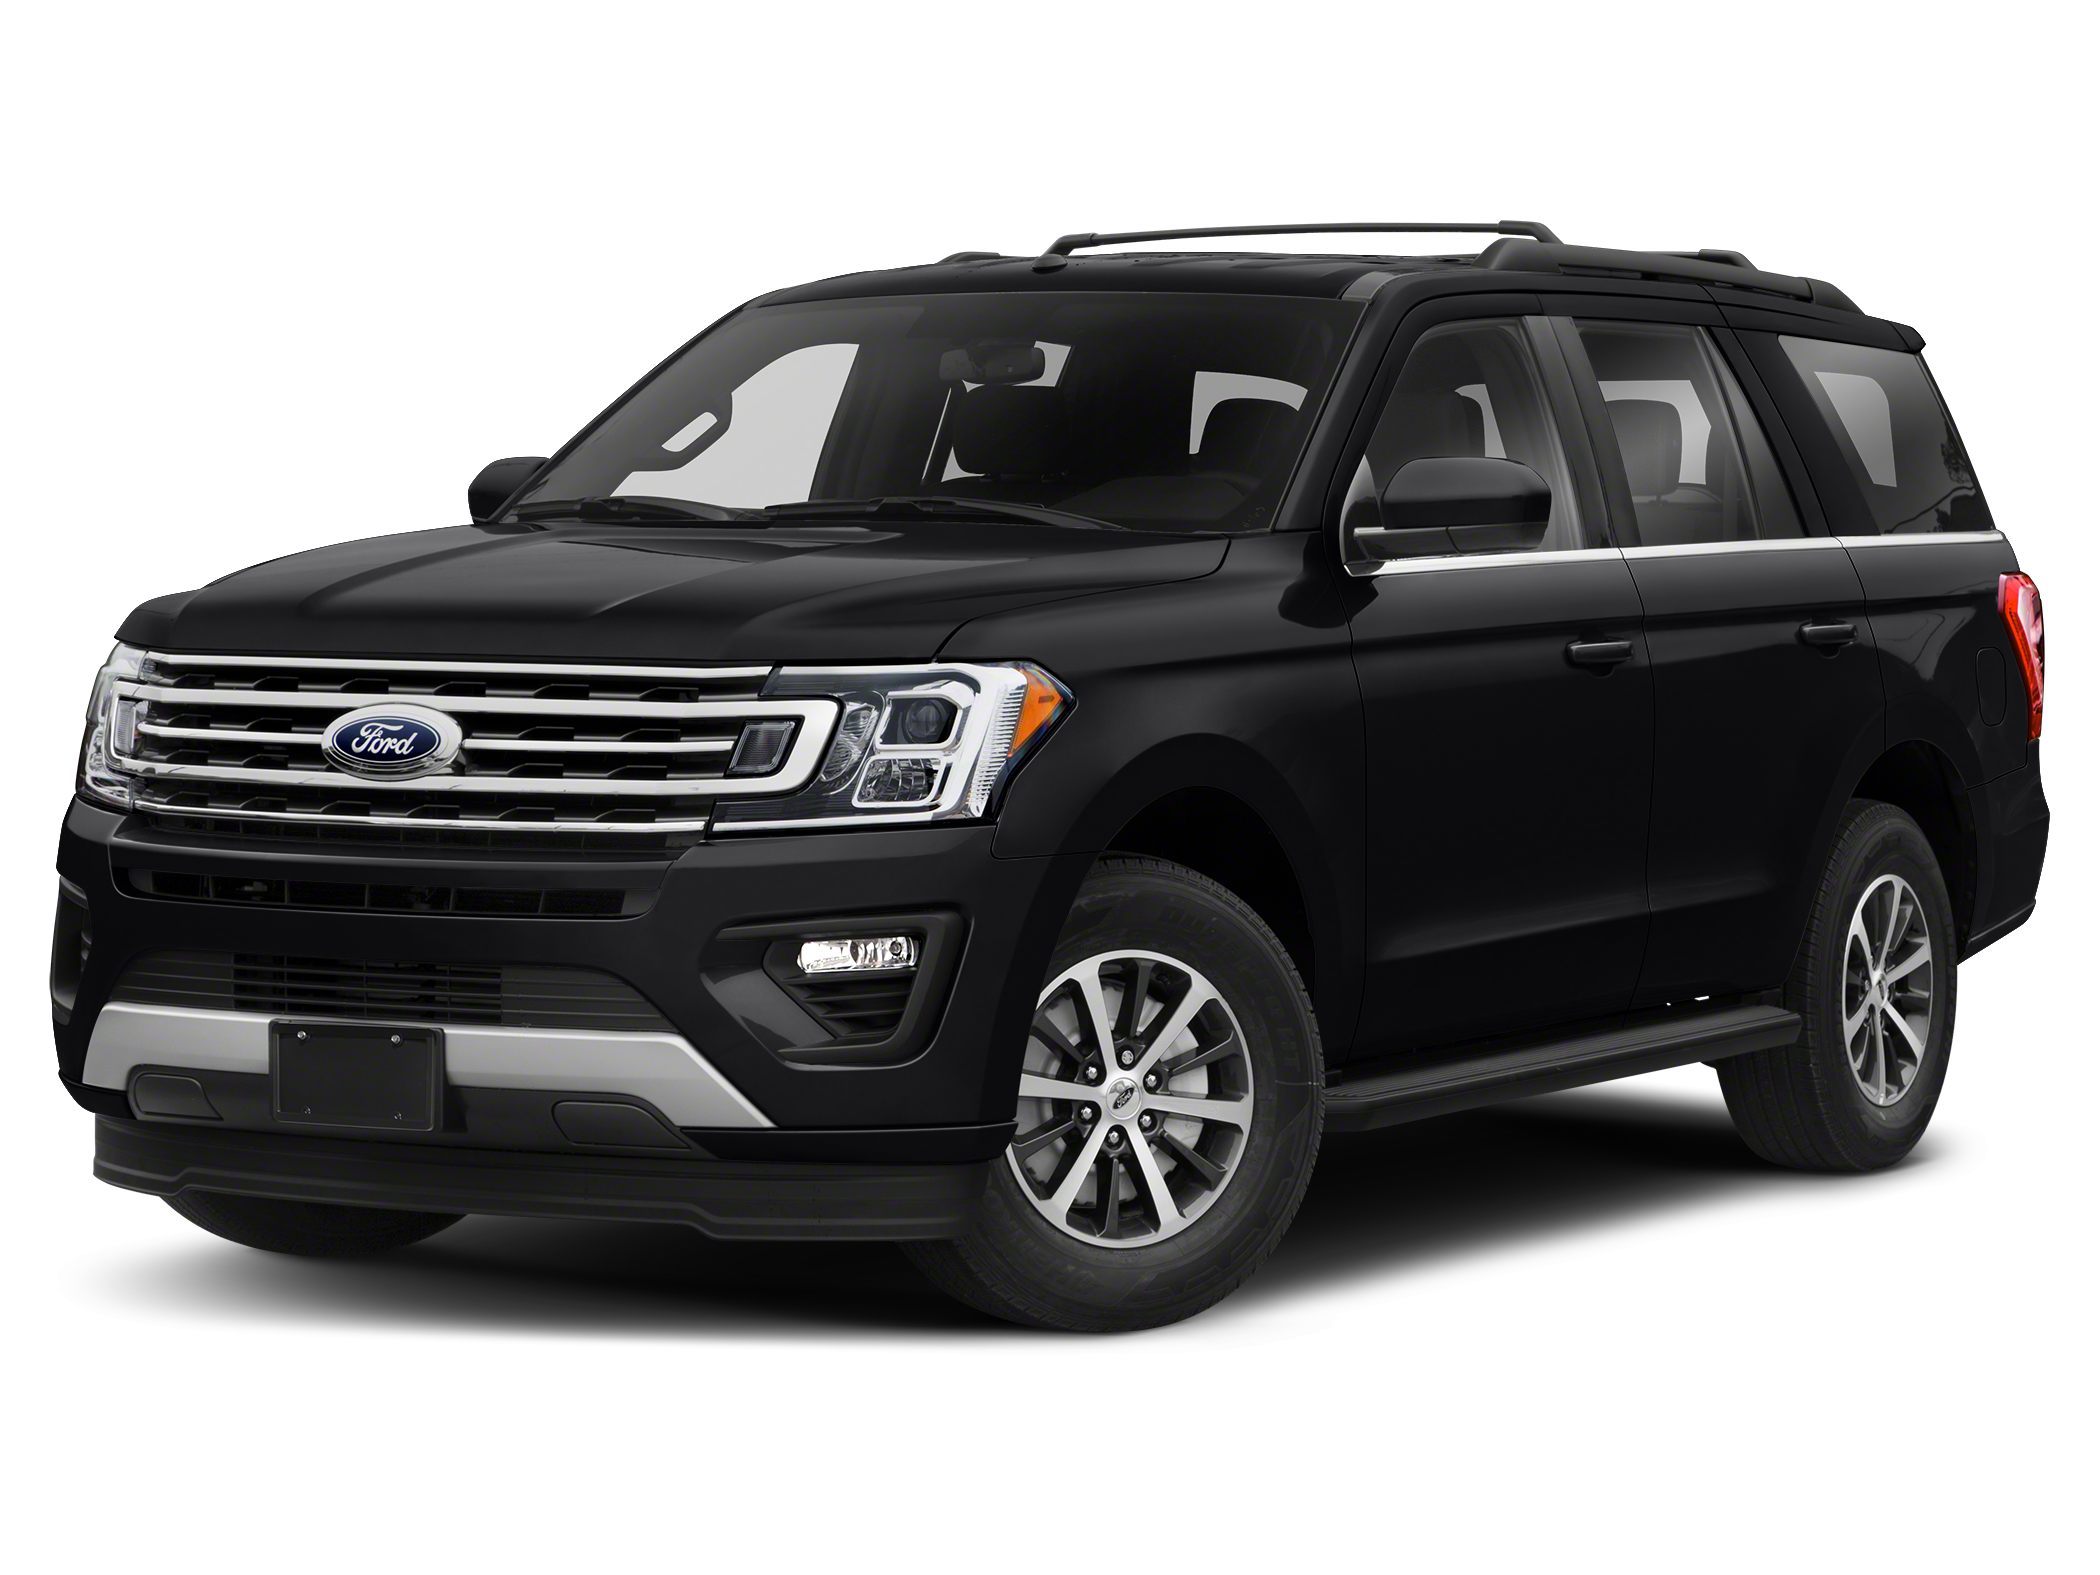 2020 Ford Expedition Limited SUV